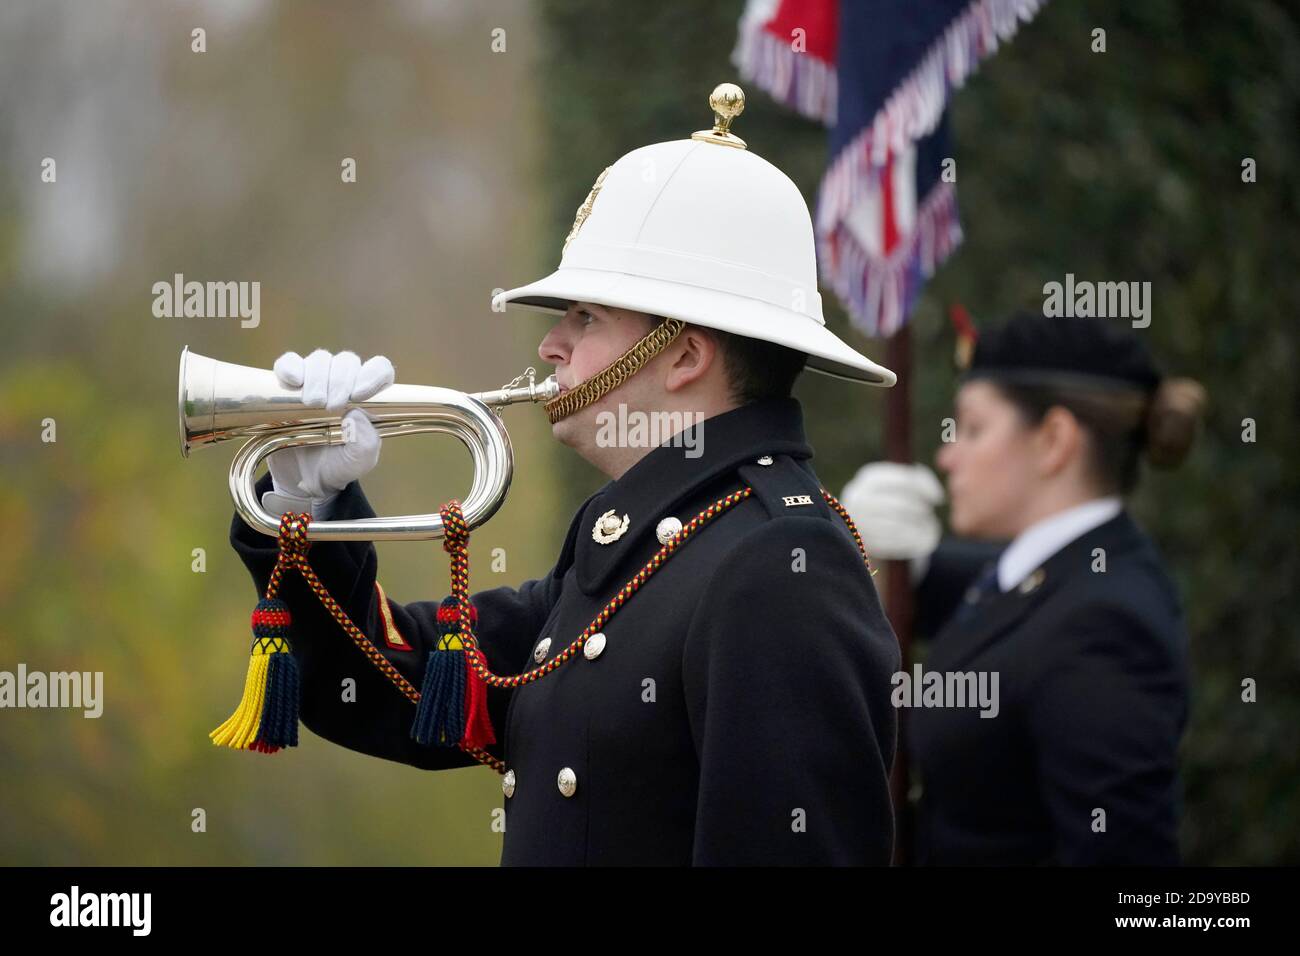 A Bugler from HM Royal Marines Band Service plays the Last Post at the  National Memorial Arboretum in Alrewas, Staffordshire, to observe the  'virtual' Act of Remembrance from the Armed Forces Memorial